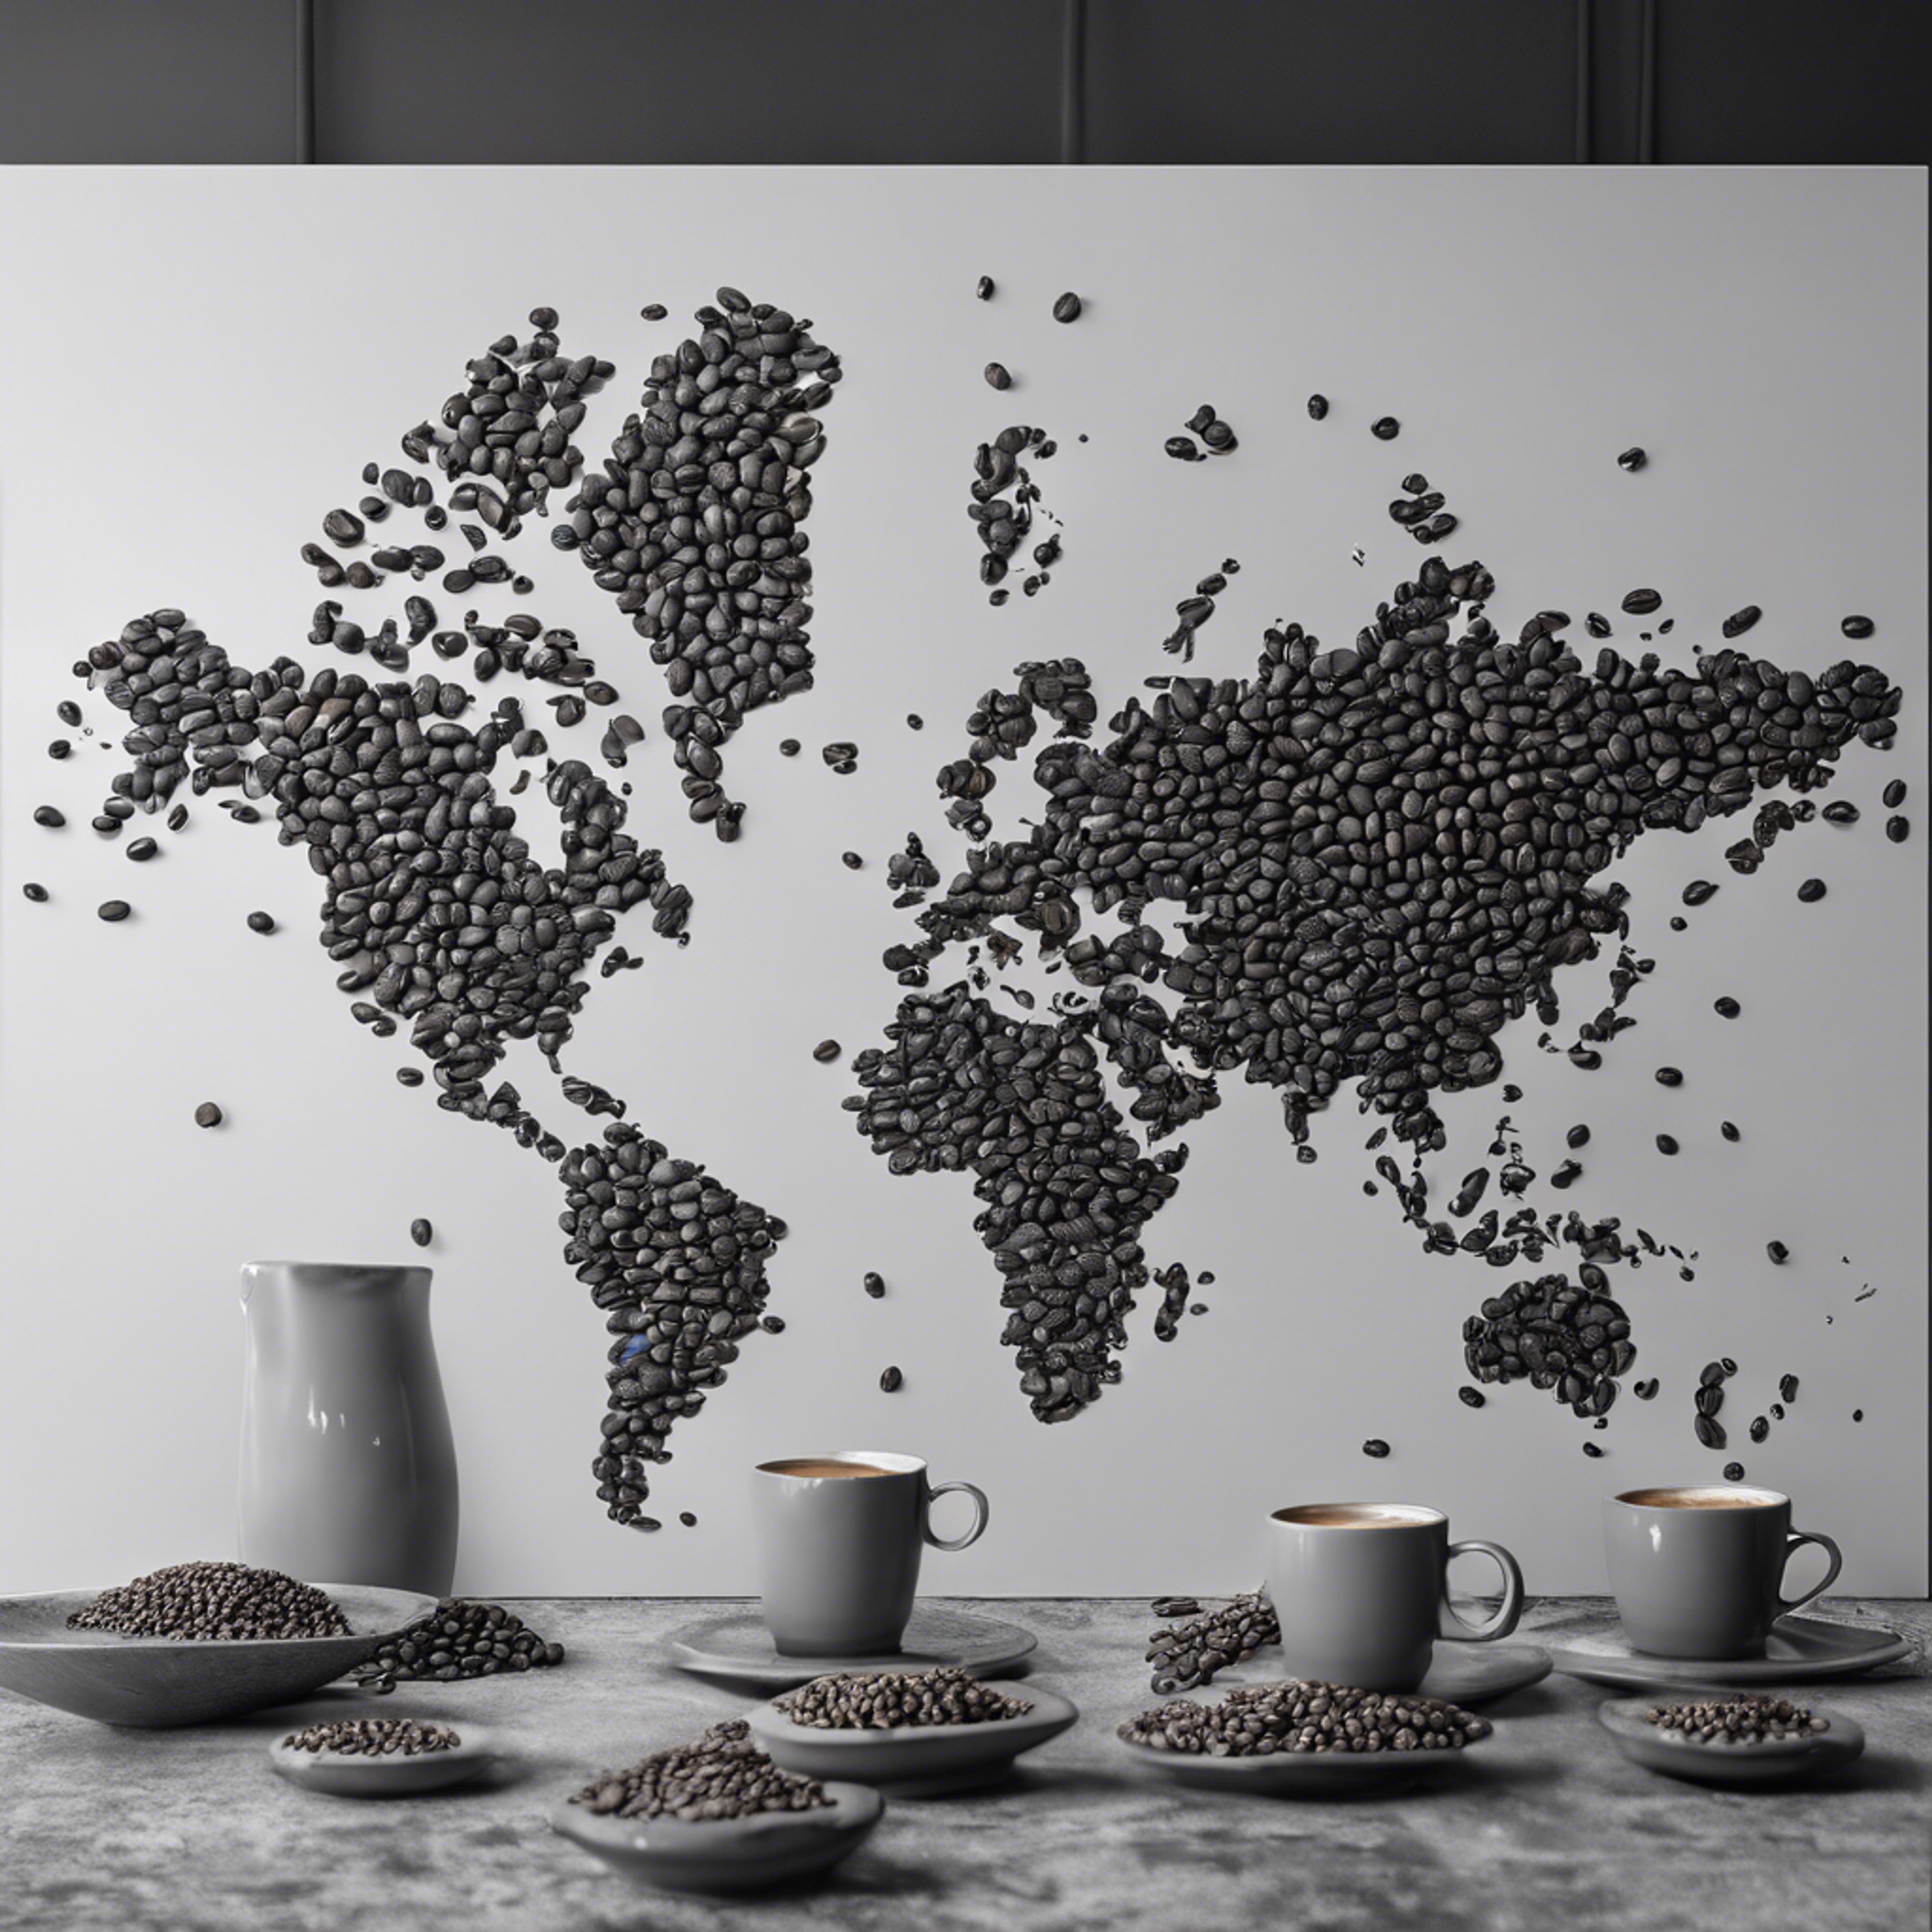 A grayscale world map laid out with coffee beans on a cafe table. Behang[a42175c9d73a43528667]